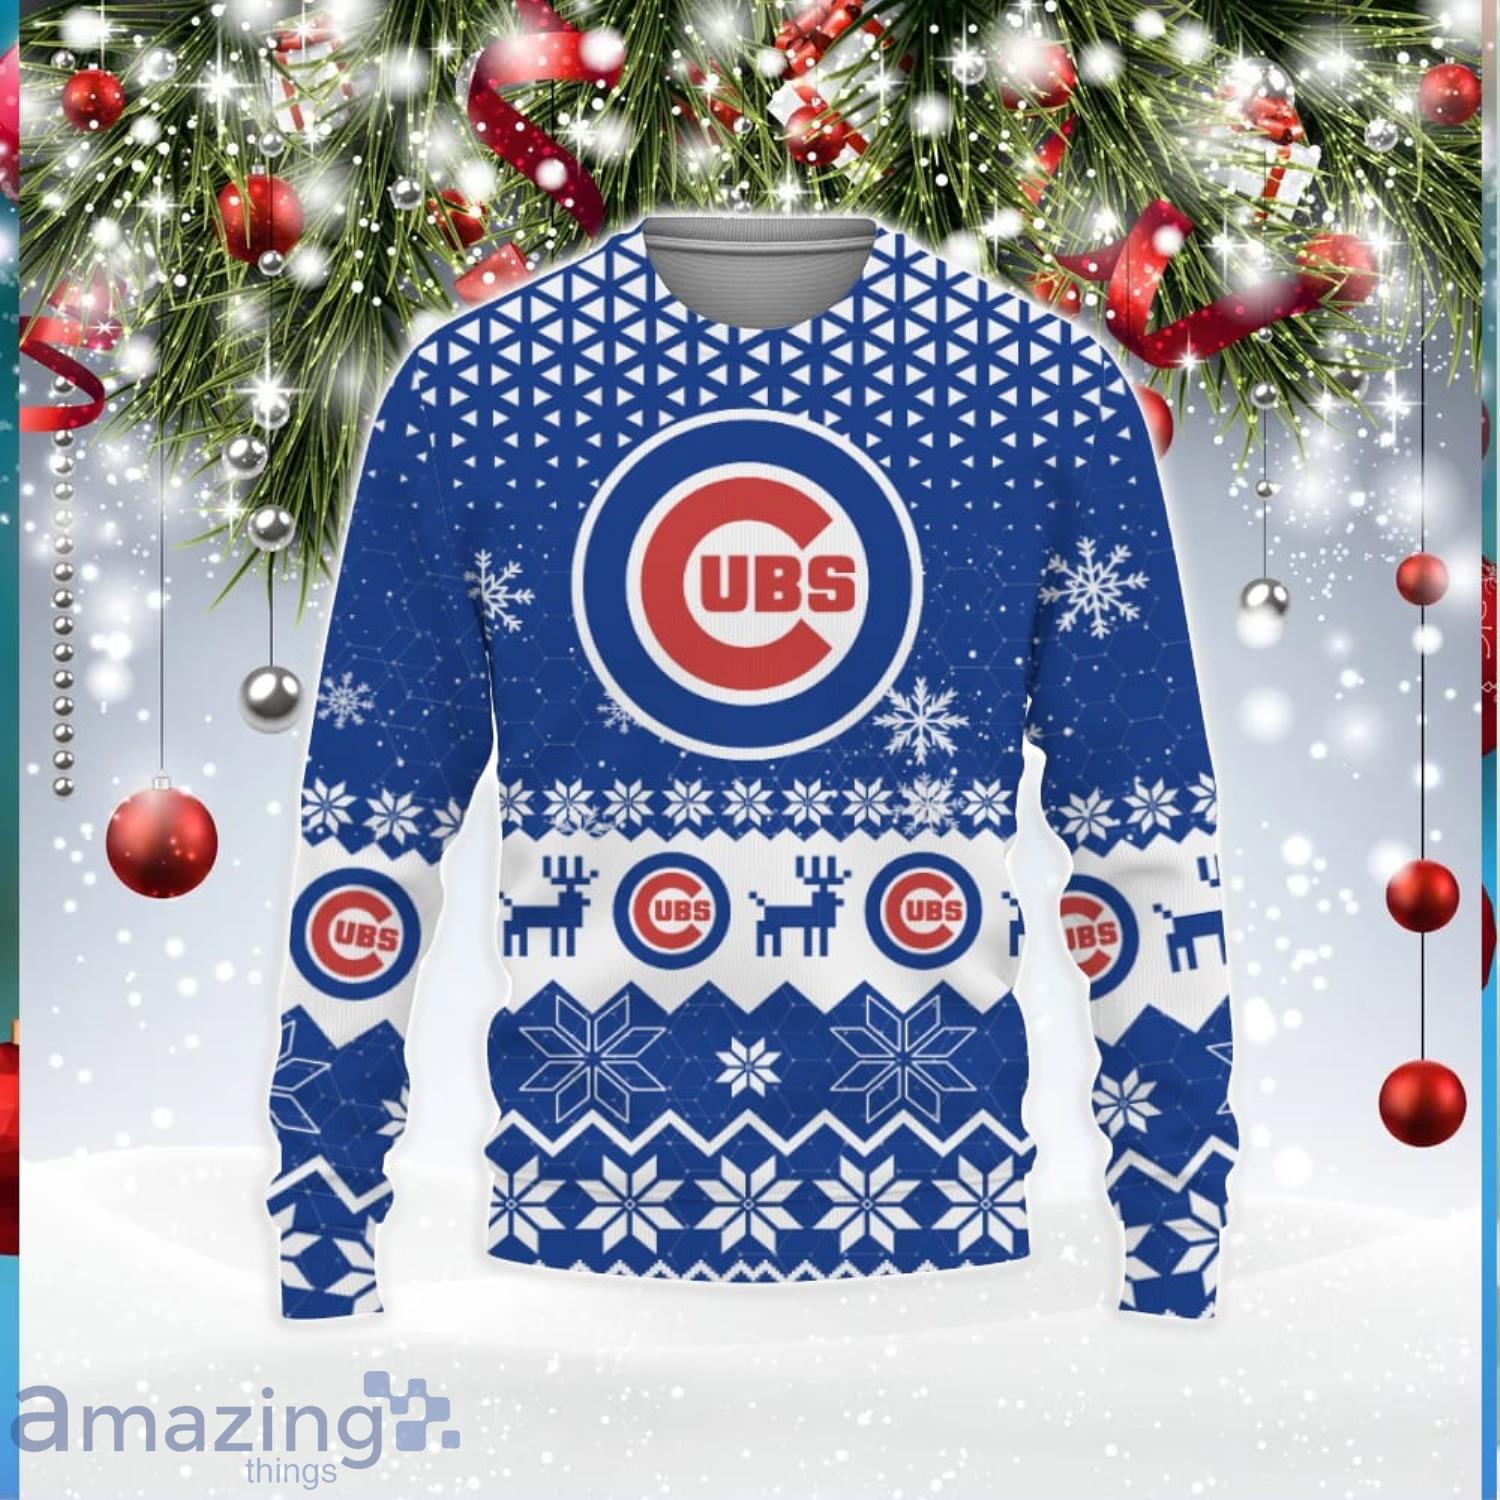 MLB Sport Fans Chicago Cubs Grateful Dead Christmas Gift Pattern Ugly  Christmas Sweater - Freedomdesign